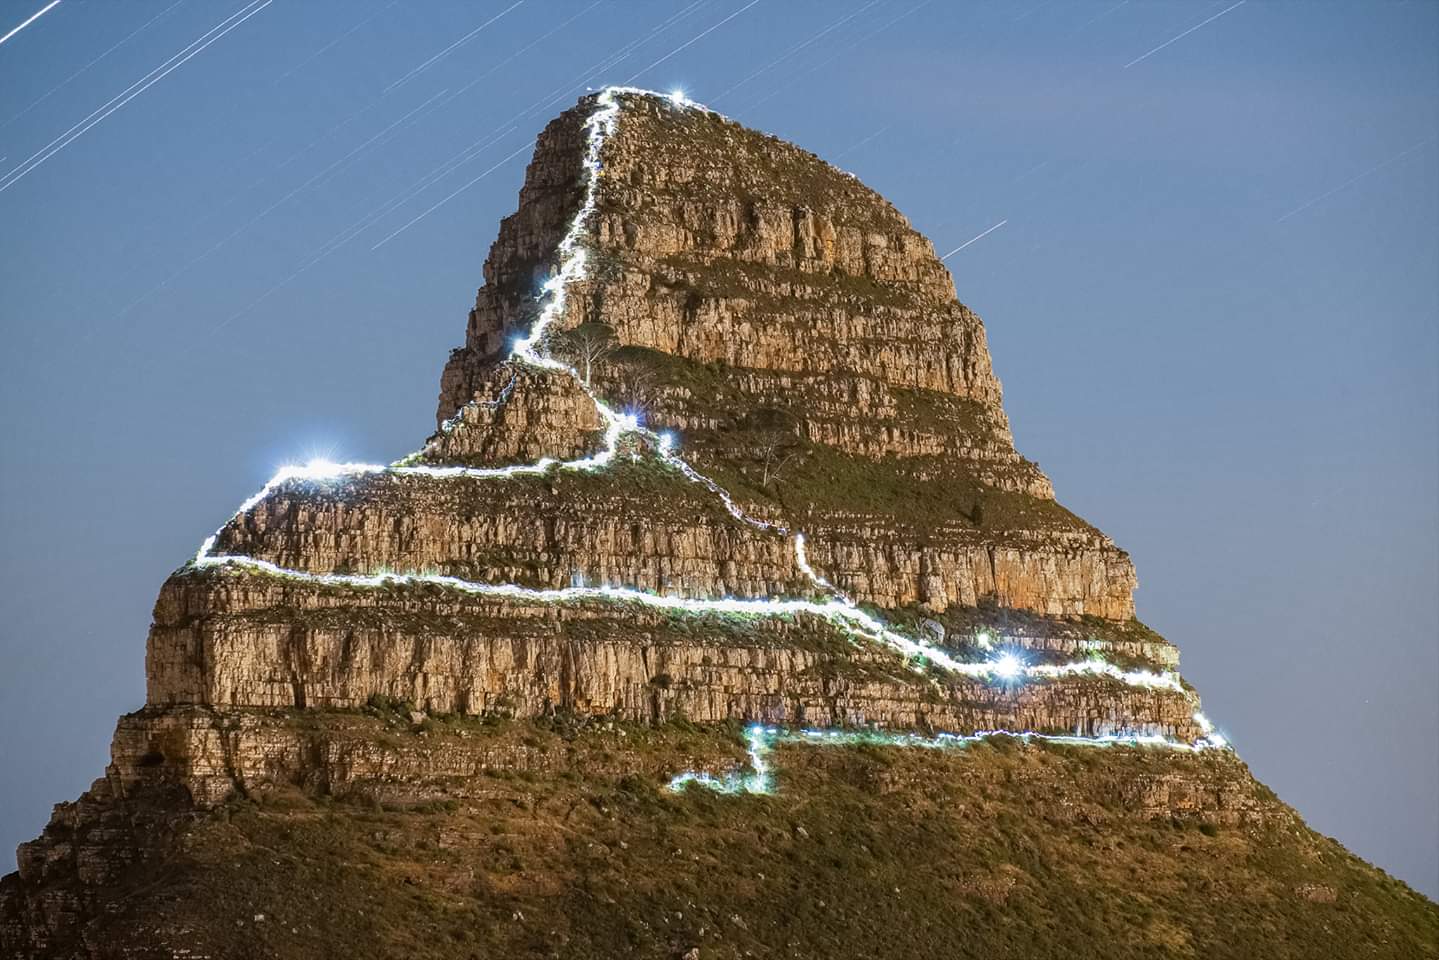 Lion's Head Mountain [Photo by Reddit]